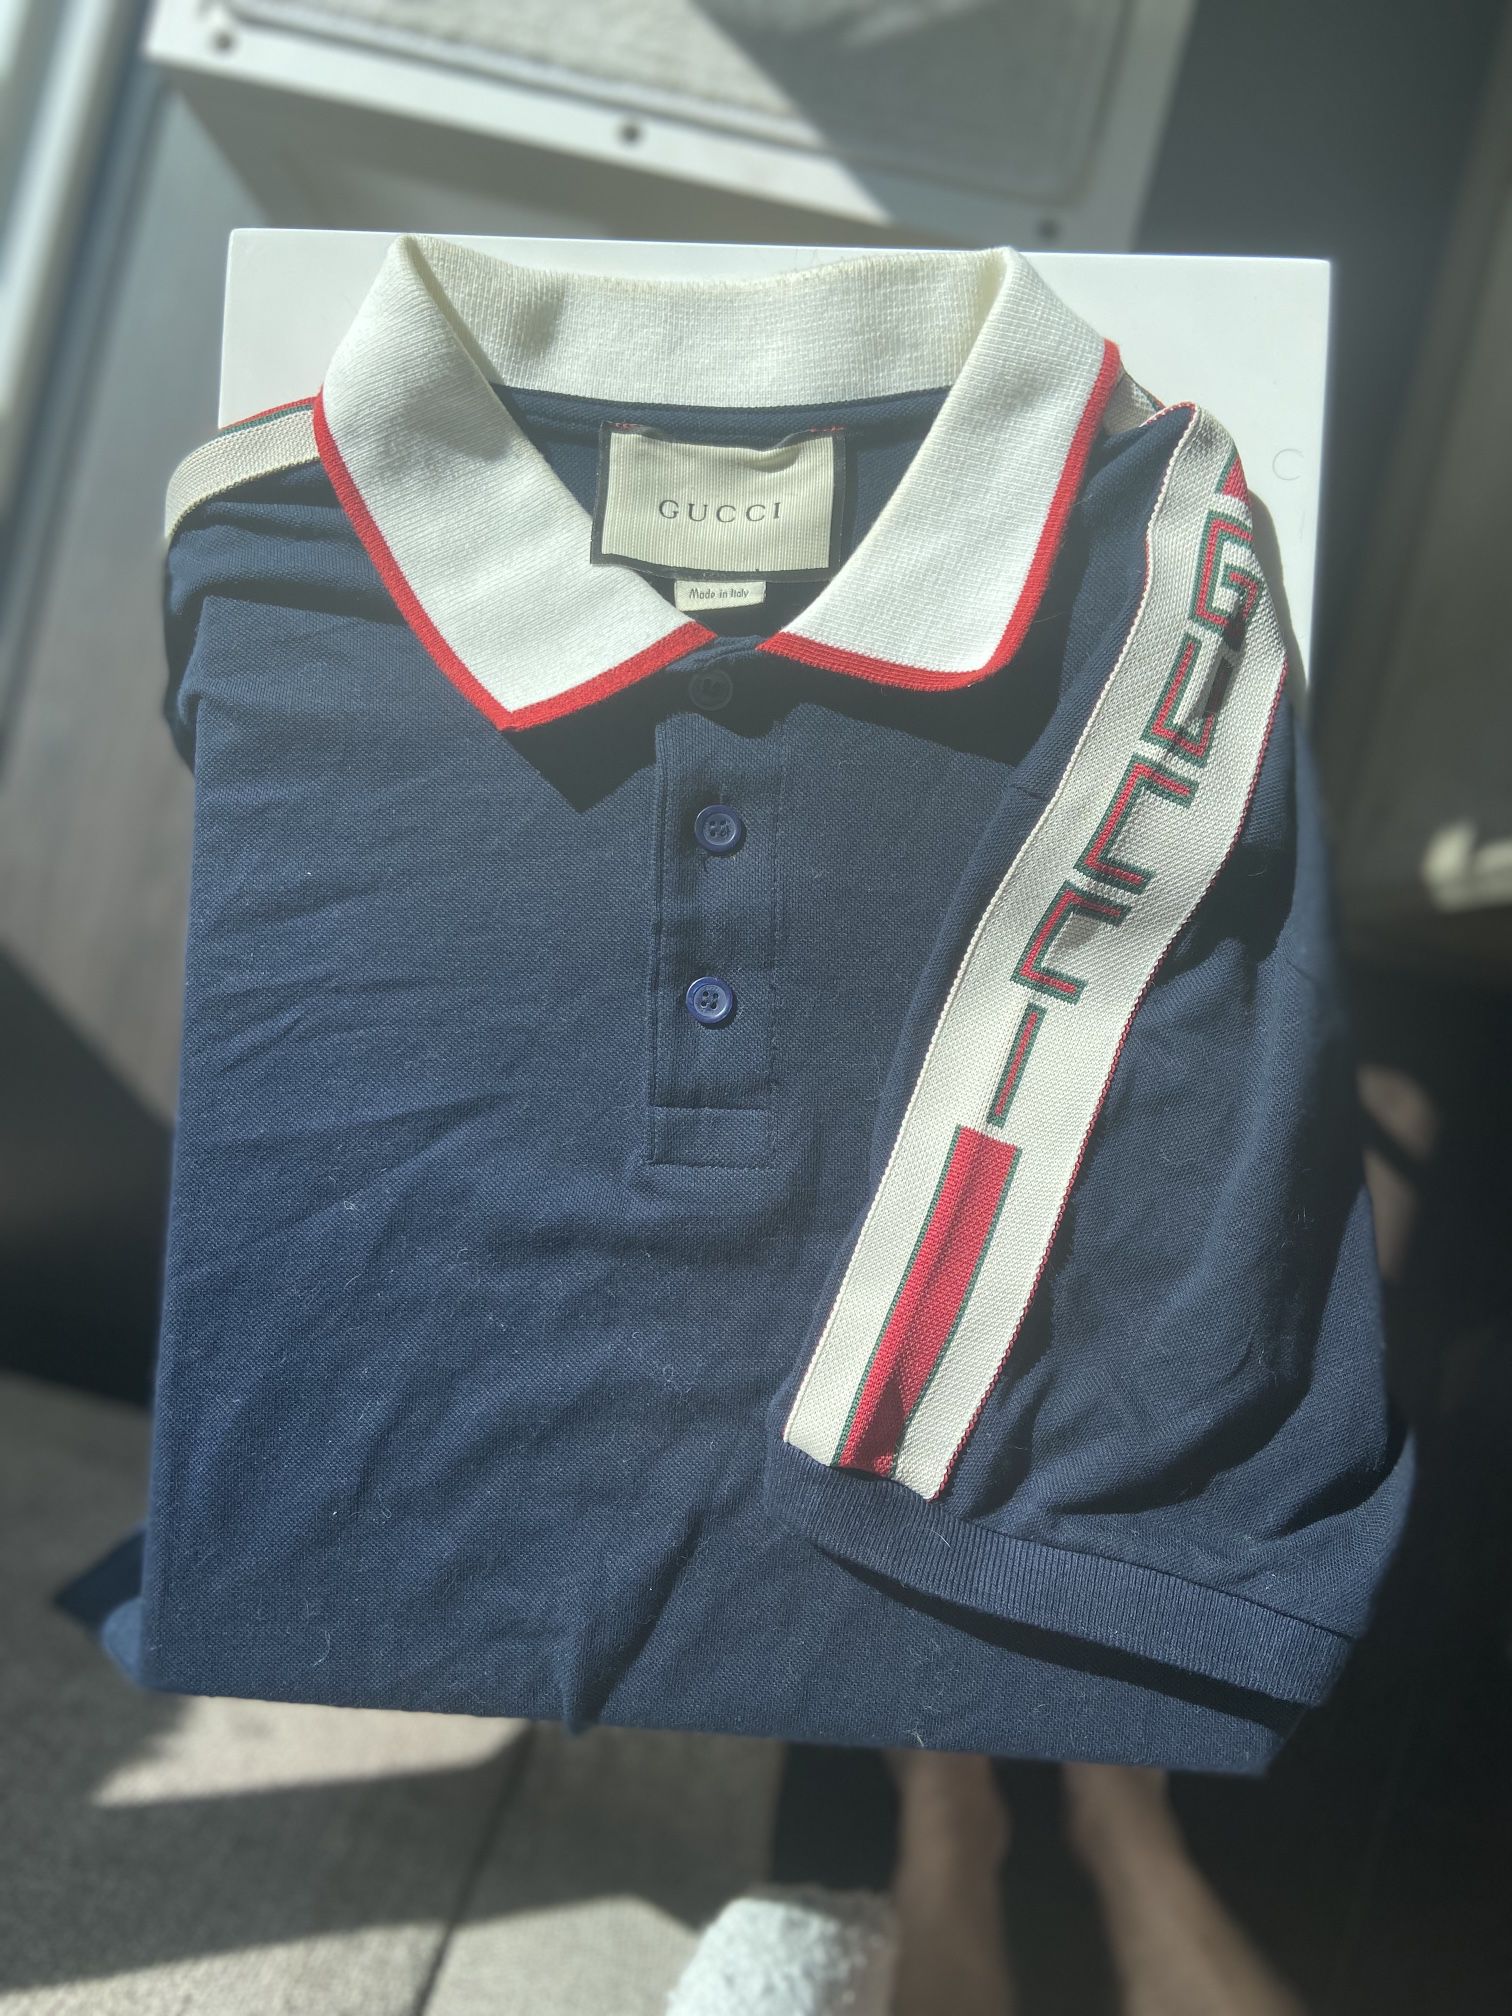 Gucci polo with Tag and receipt